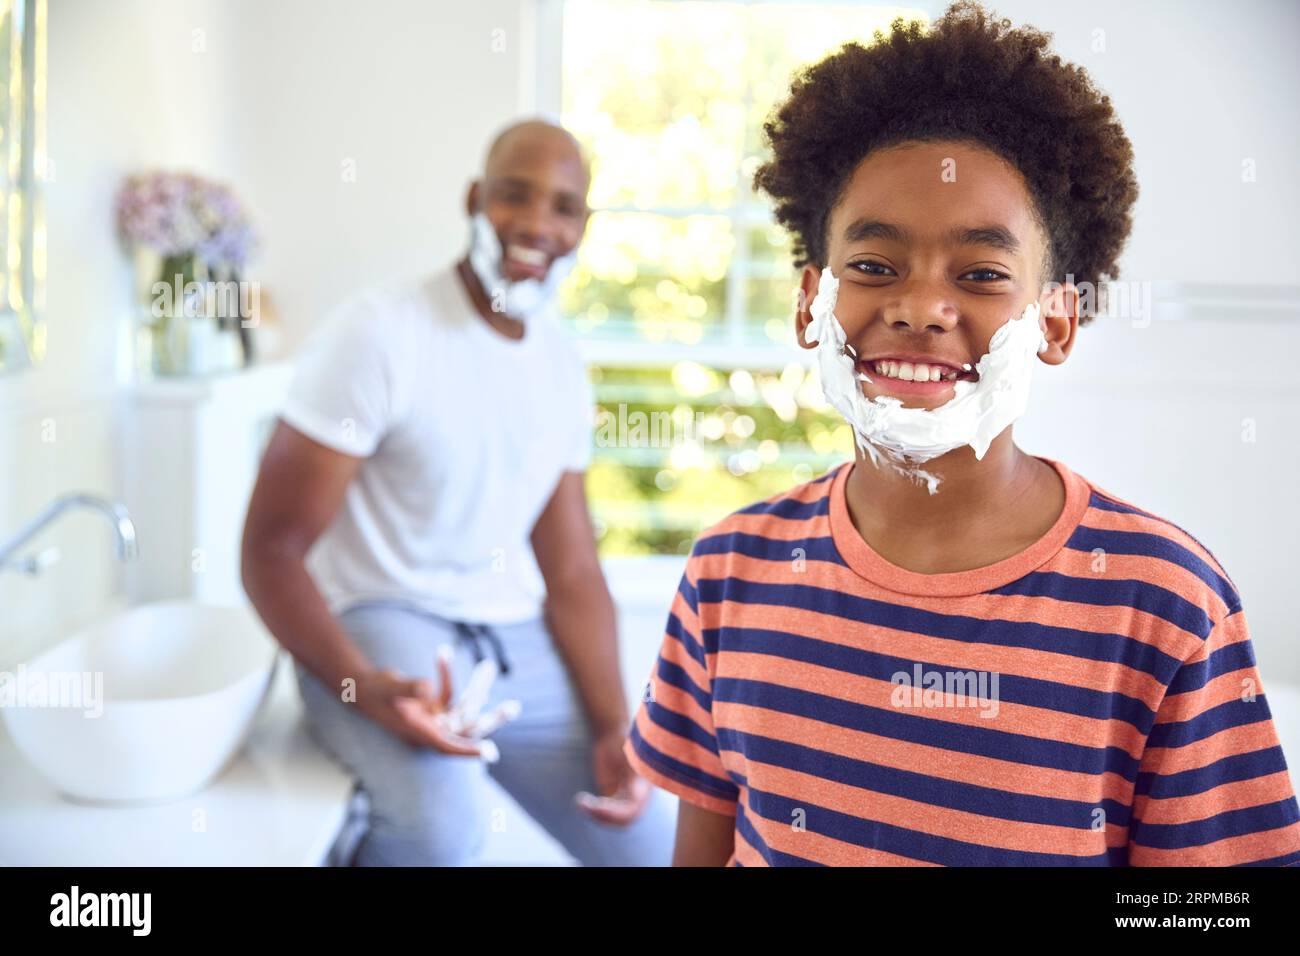 Father And Son At Home Having Fun Playing With Shaving Foam In Bathroom Making A Mess Together Stock Photo